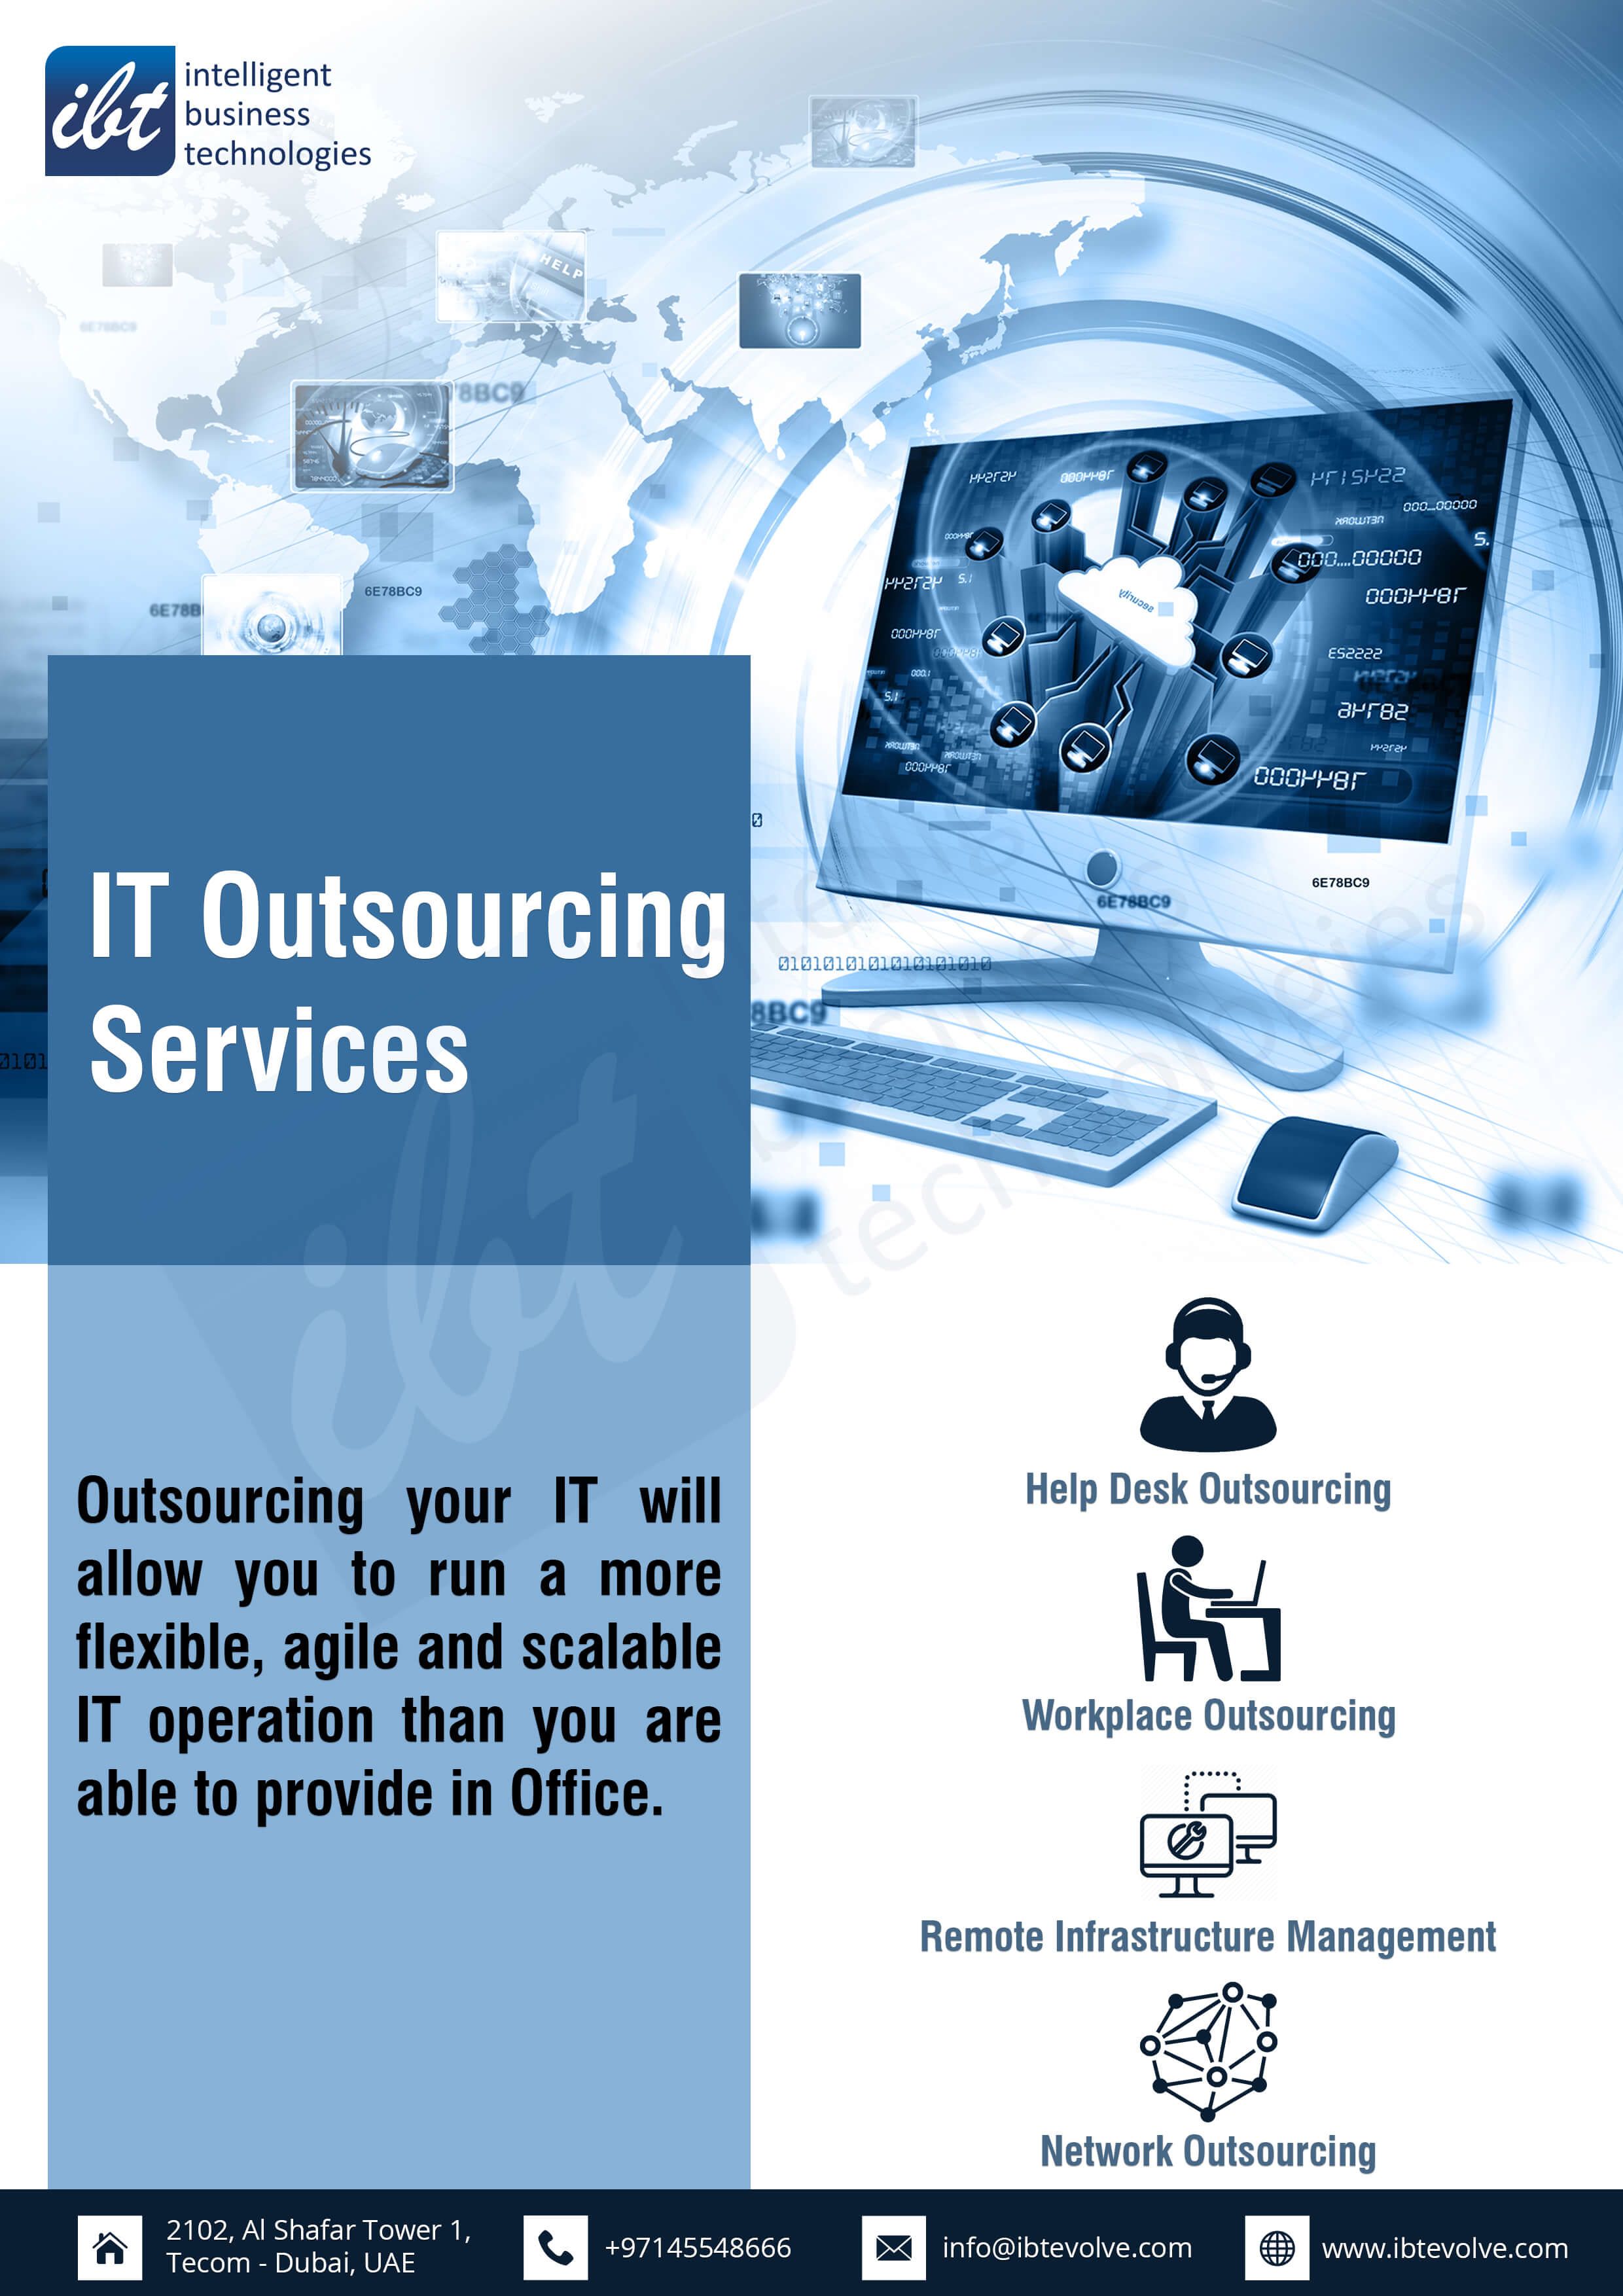 Maximize IT Outsourcing Support Drive Growth